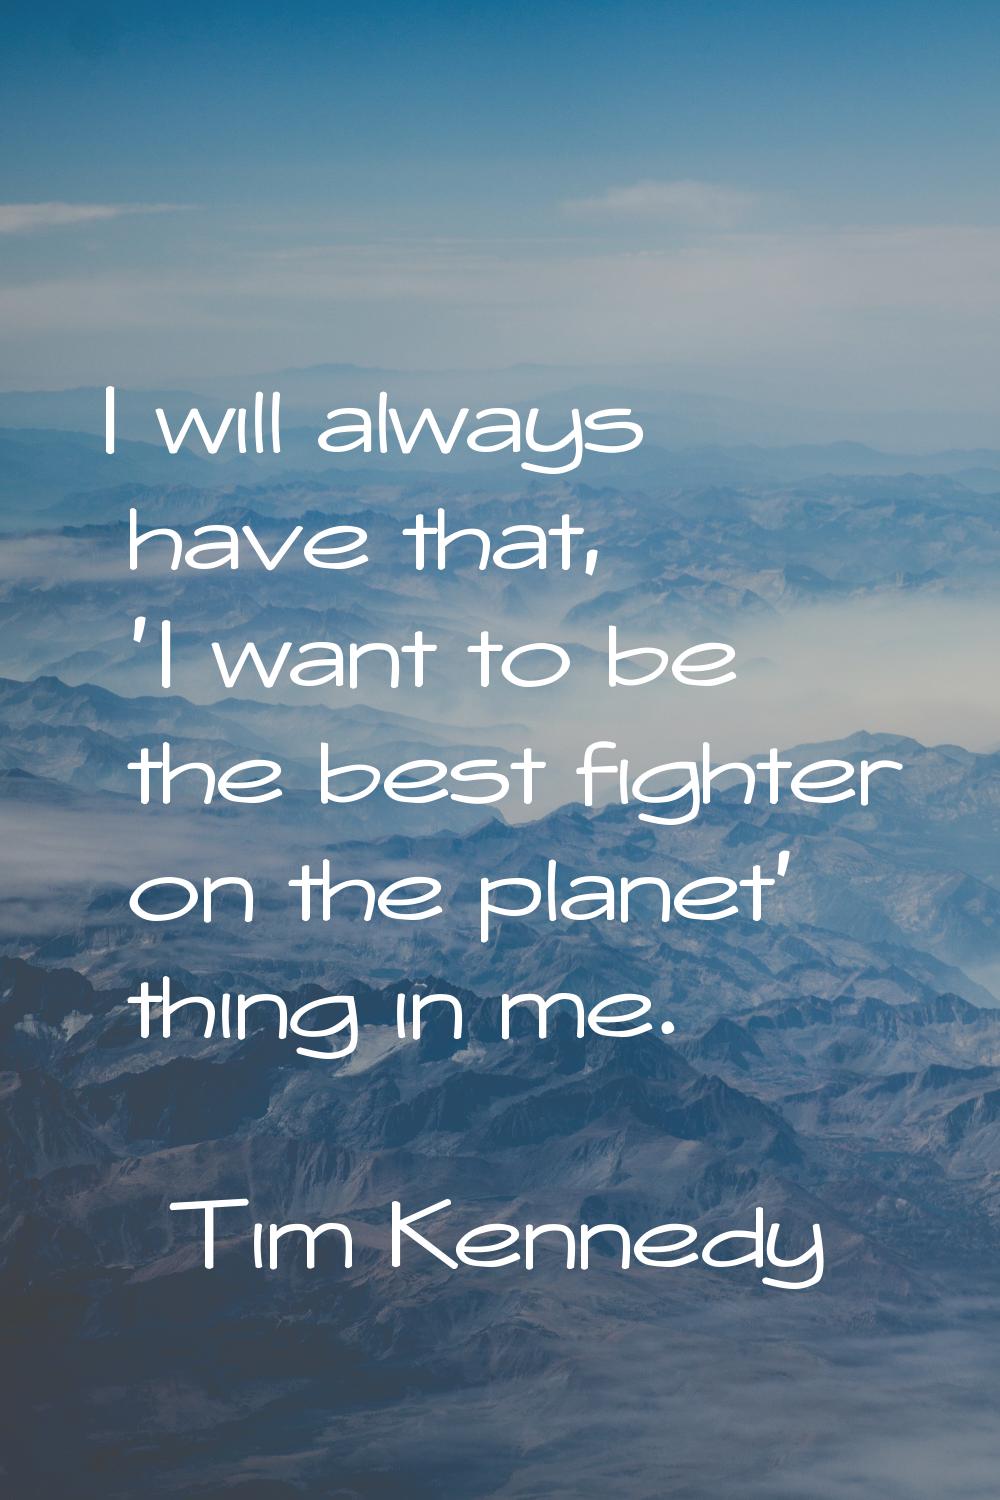 I will always have that, 'I want to be the best fighter on the planet' thing in me.